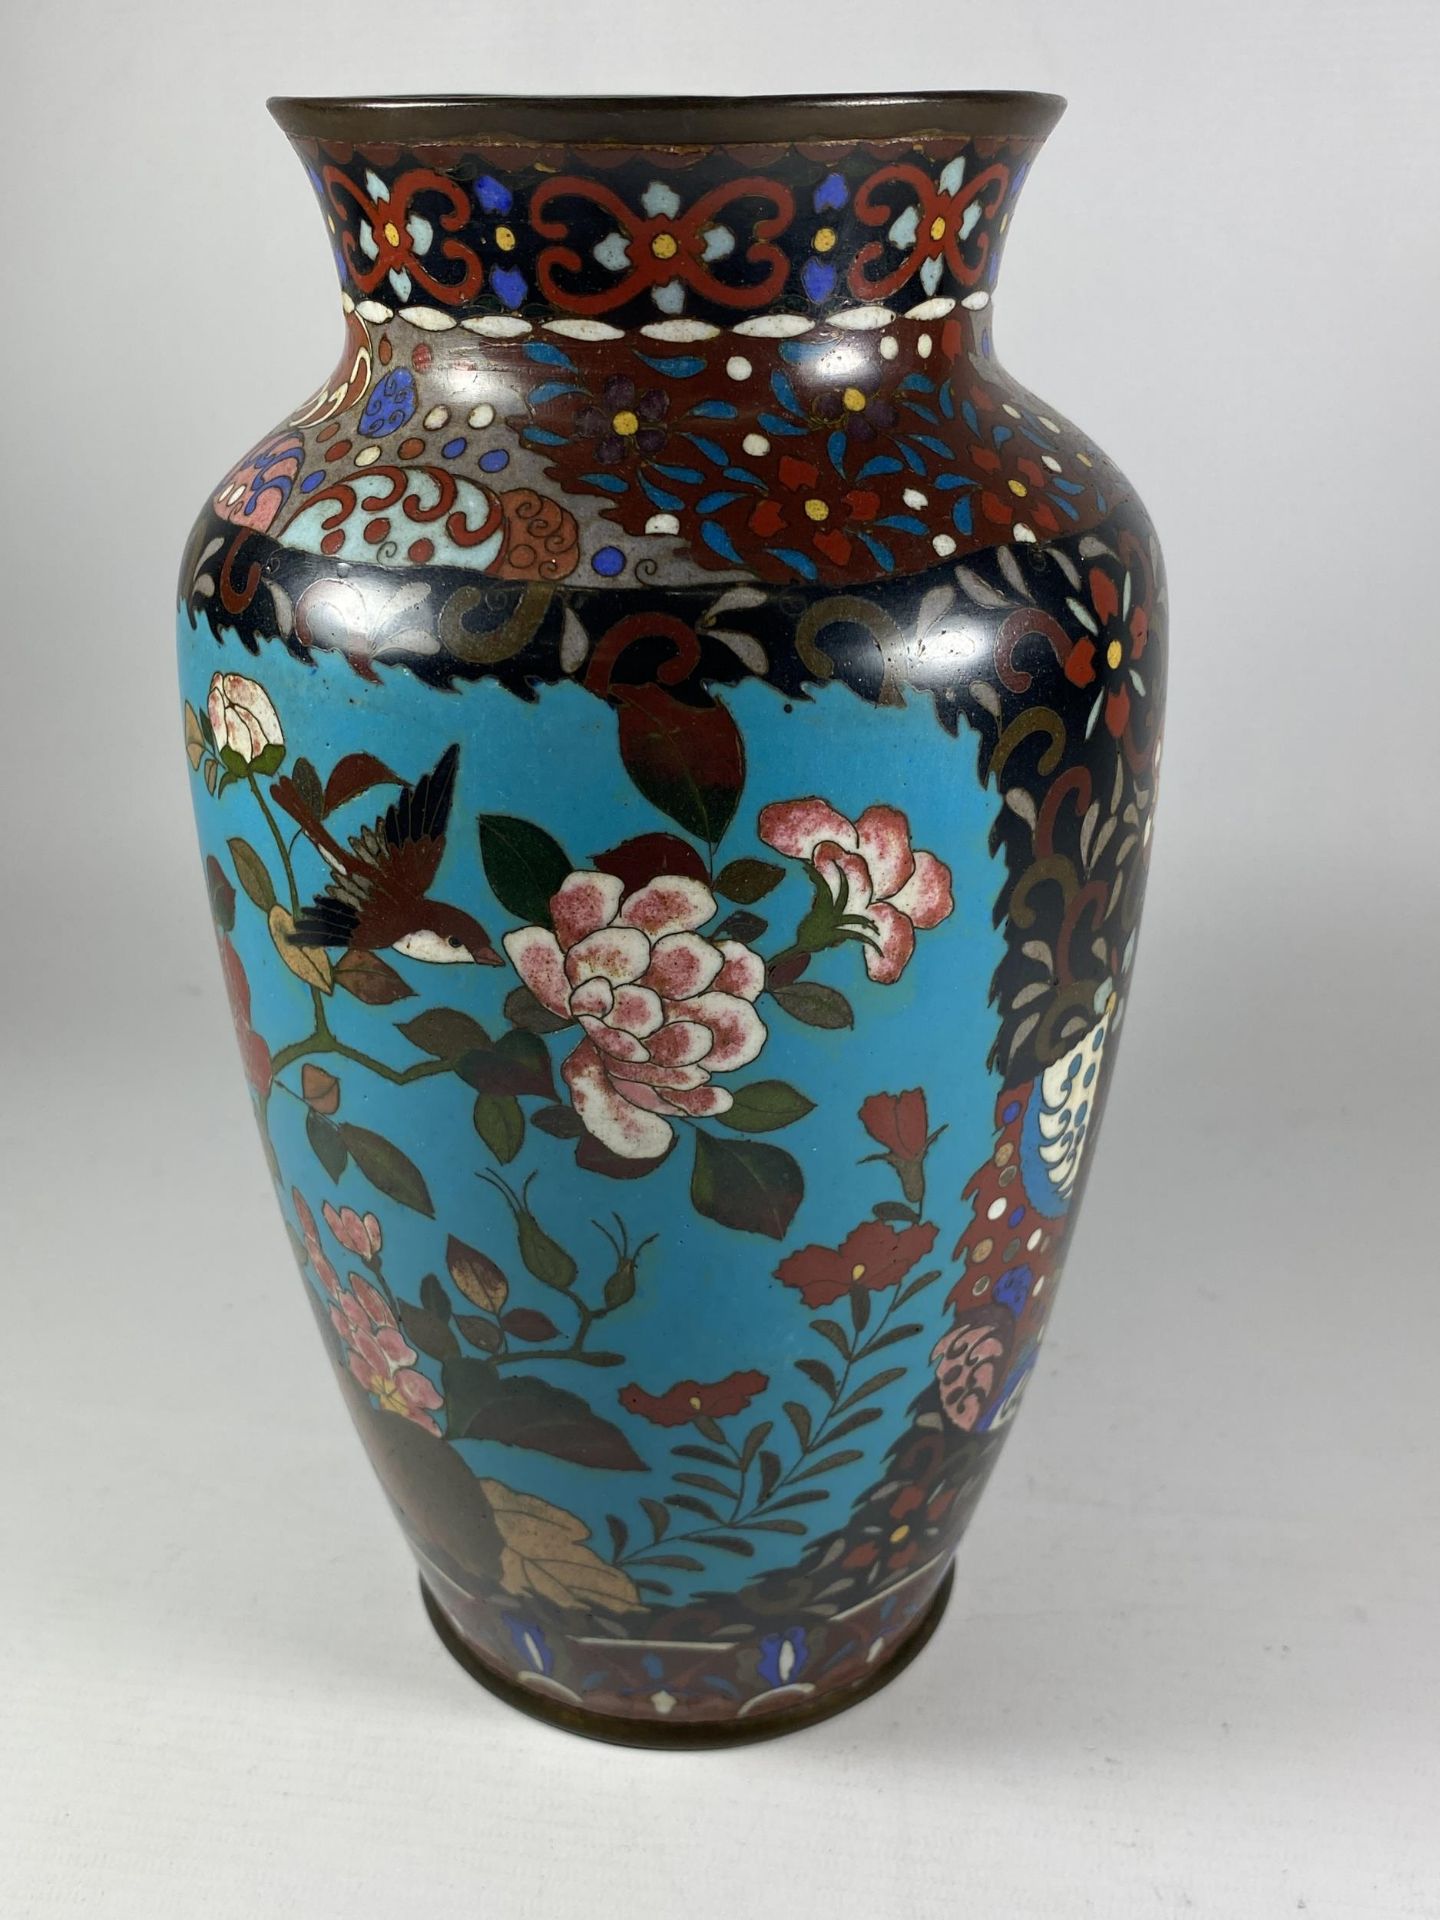 A 19TH CENTURY CHINESE CLOISONNE VASE WITH BIRD & FLORAL DESIGN, HEIGHT 26.5CM - Image 3 of 6